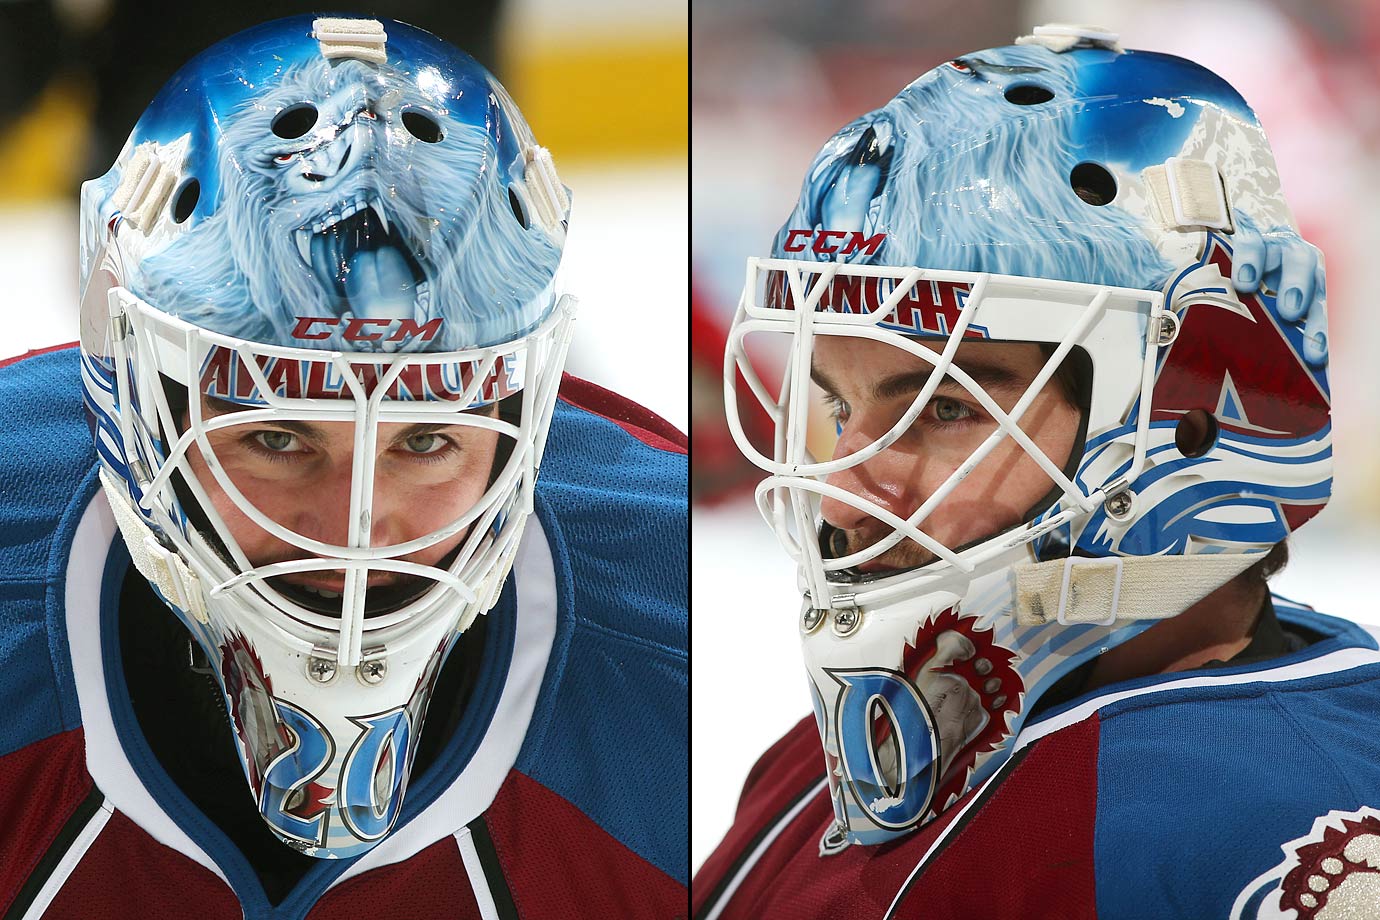 Jean Sebastien Giguere channelling his inner Yeti whenever the Colorado Avalanche wore their third jerseys in 2013.